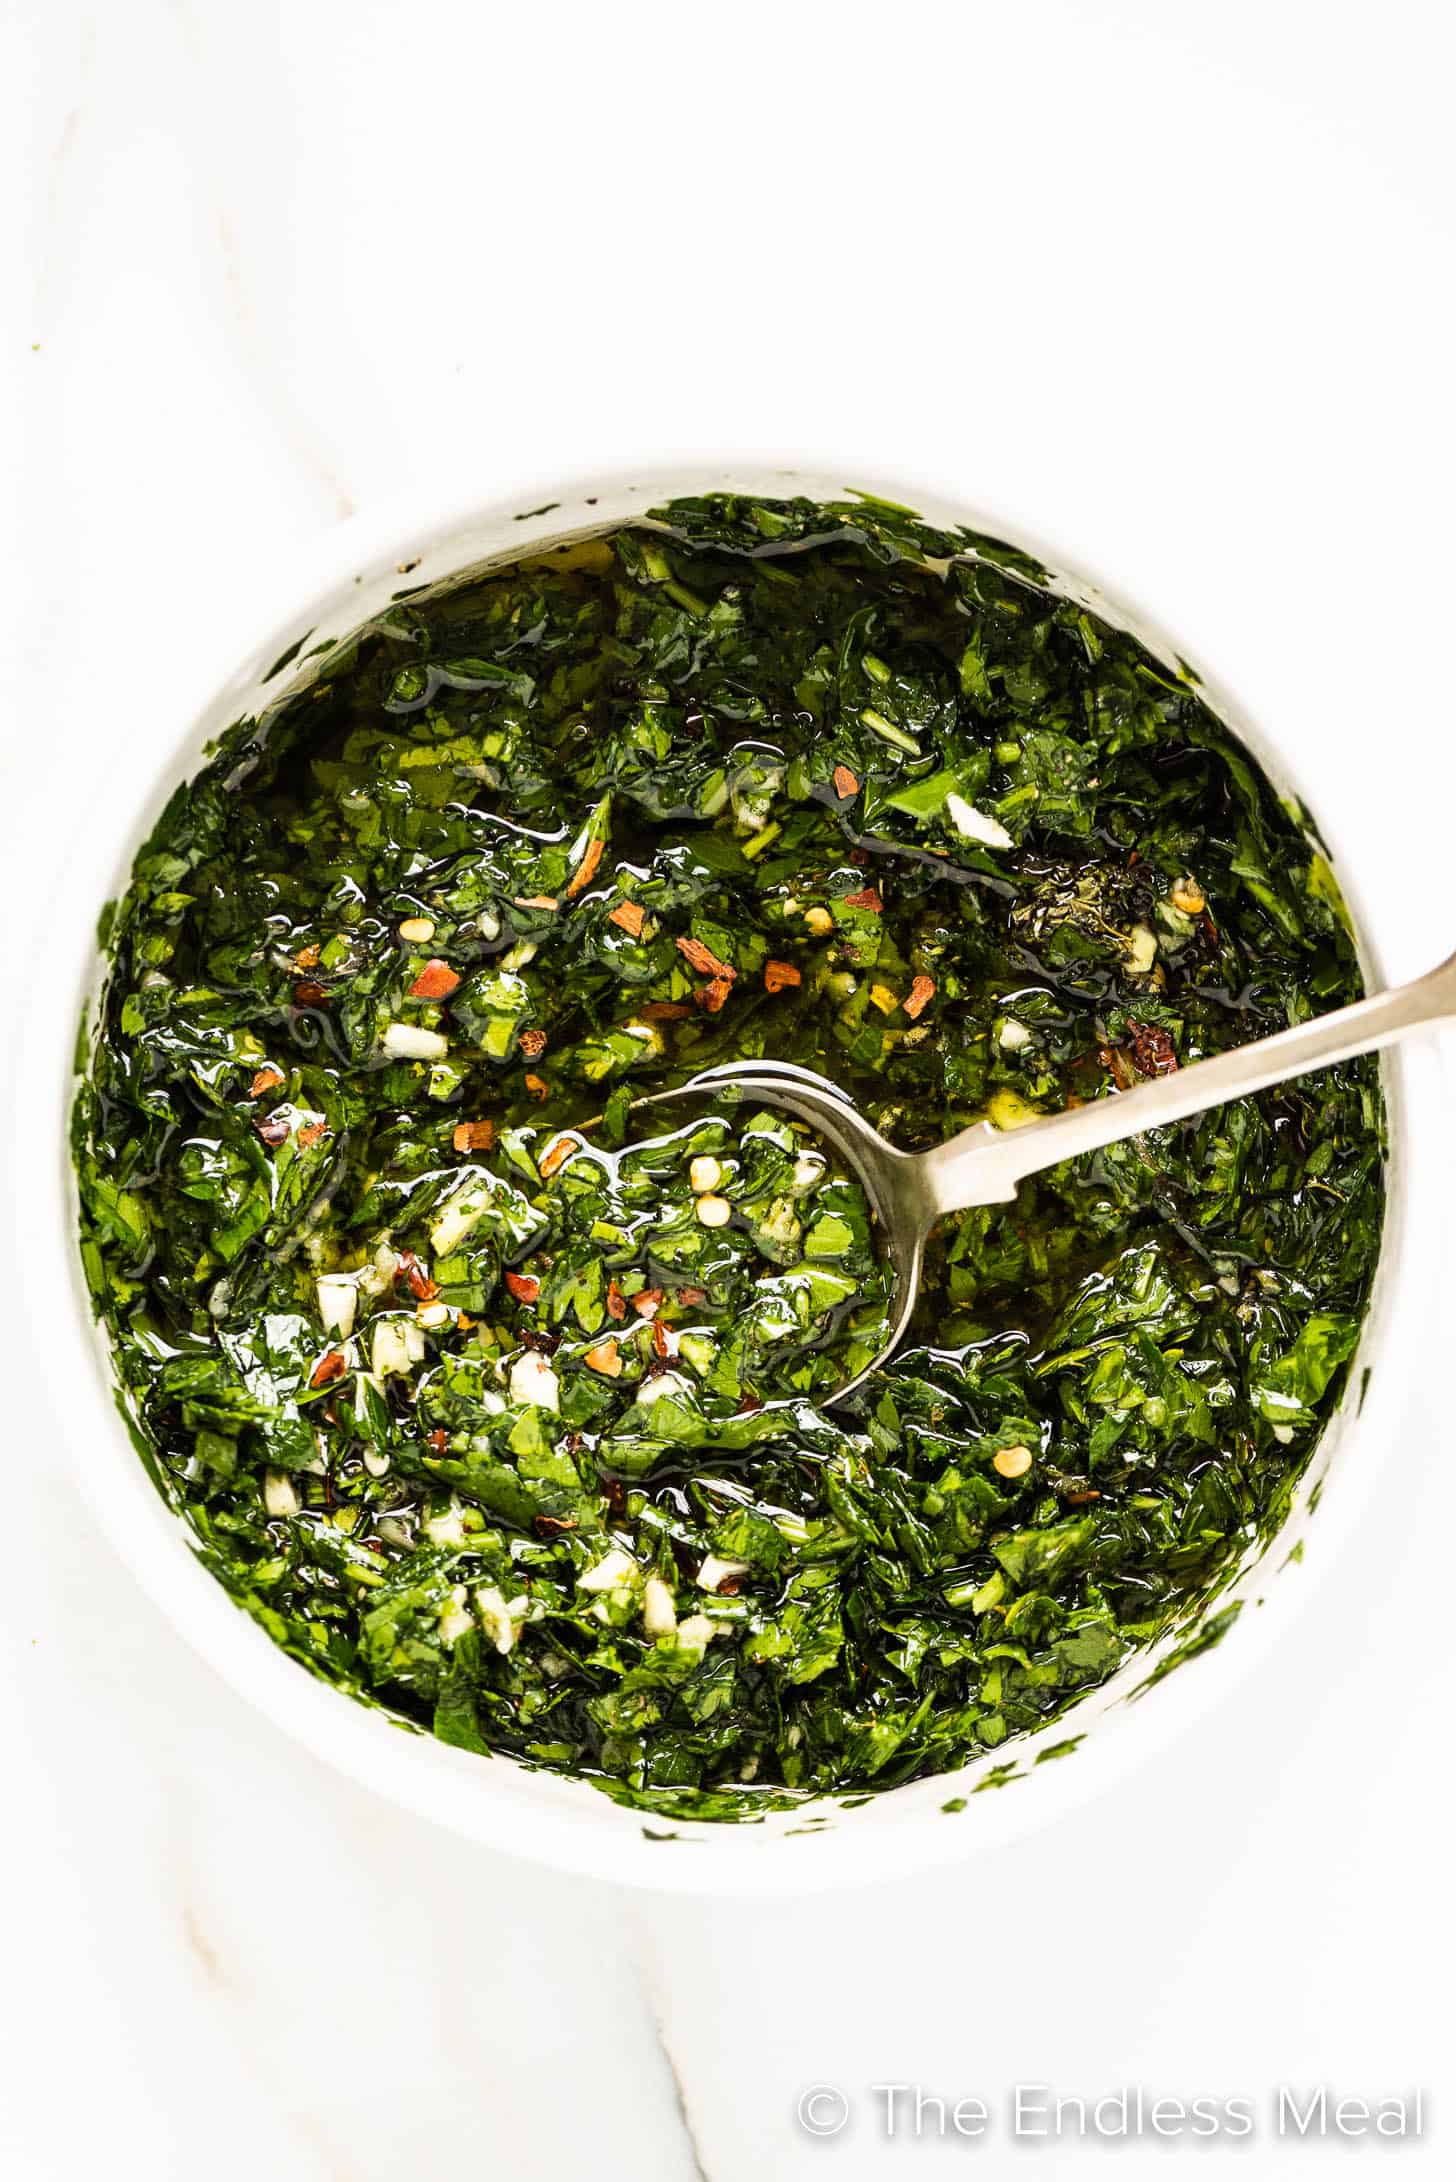 Chimichurri Sauce being mixed in a white bowl